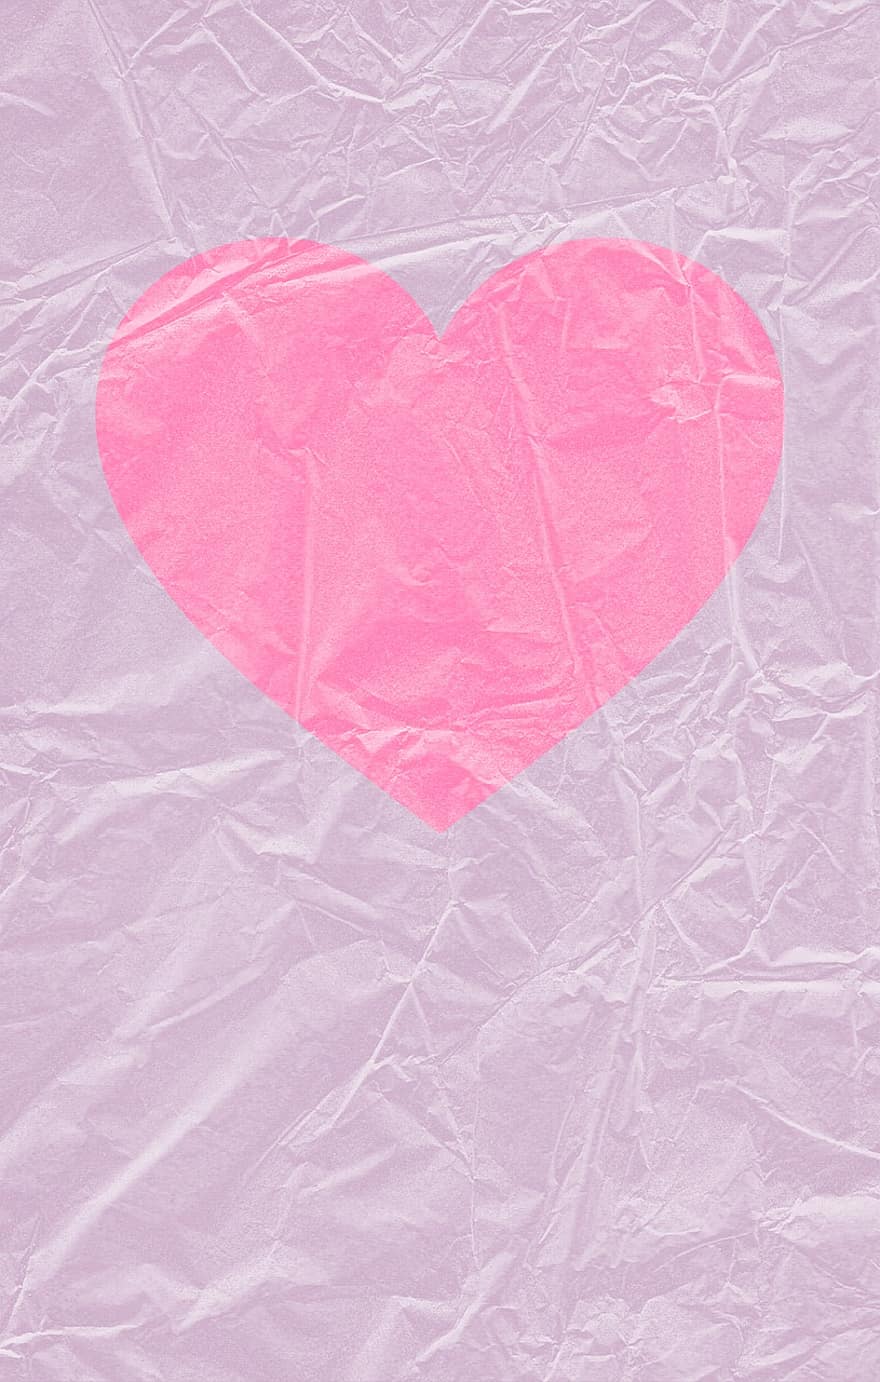 Heart, Crumpled, Background, Paper, Love, Pink, Texture, Fold, backgrounds, heart shape, abstract